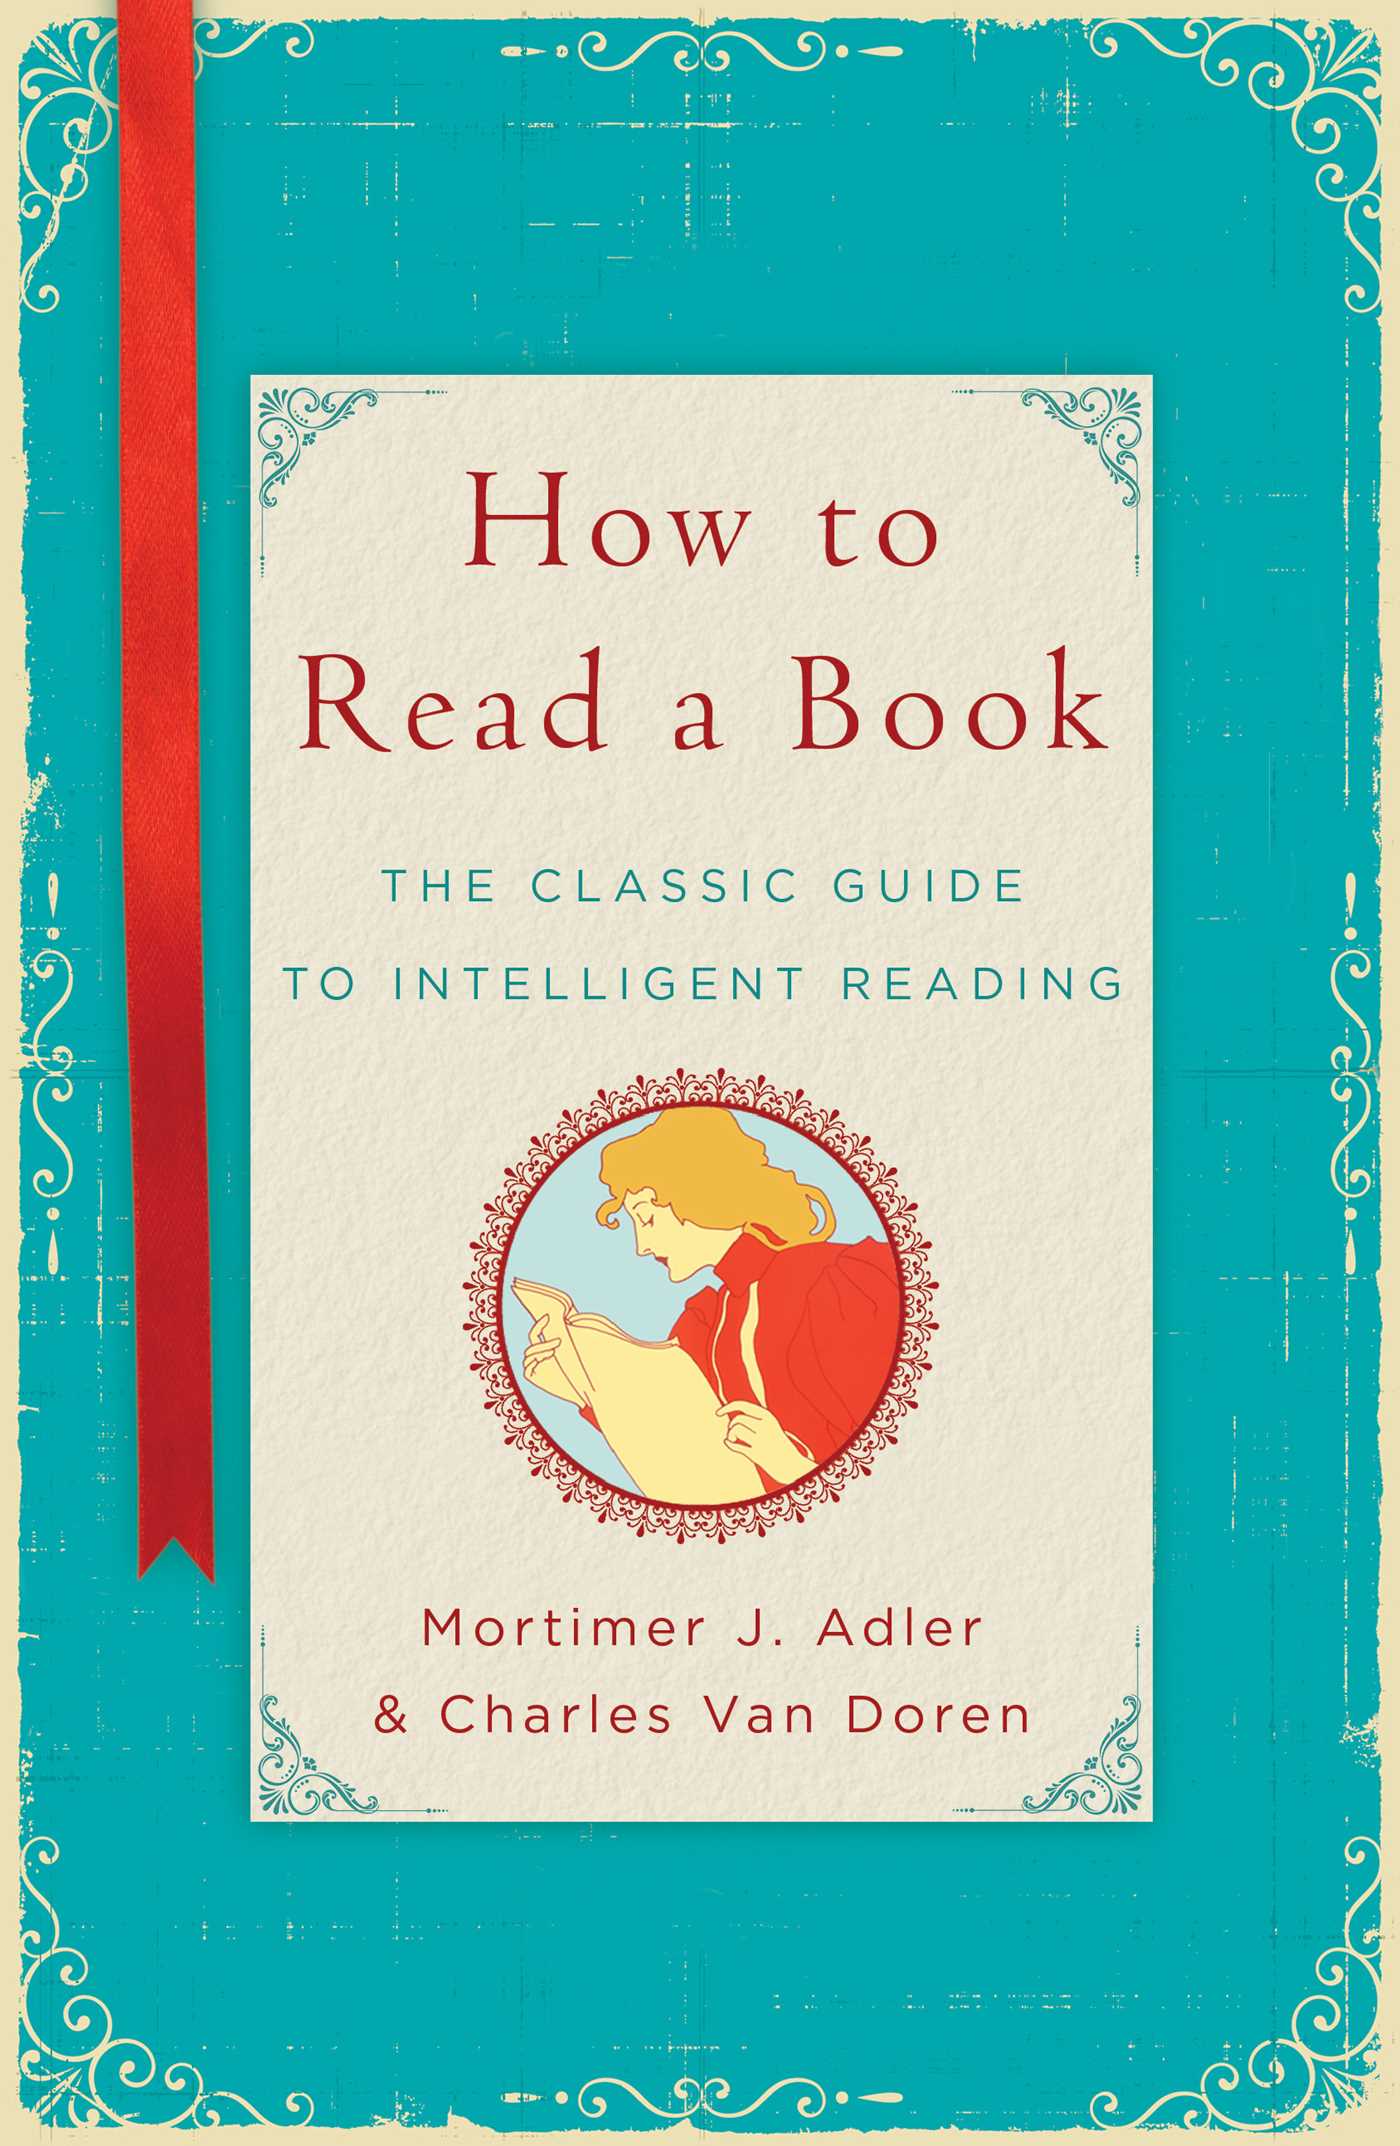 How To Read A Book